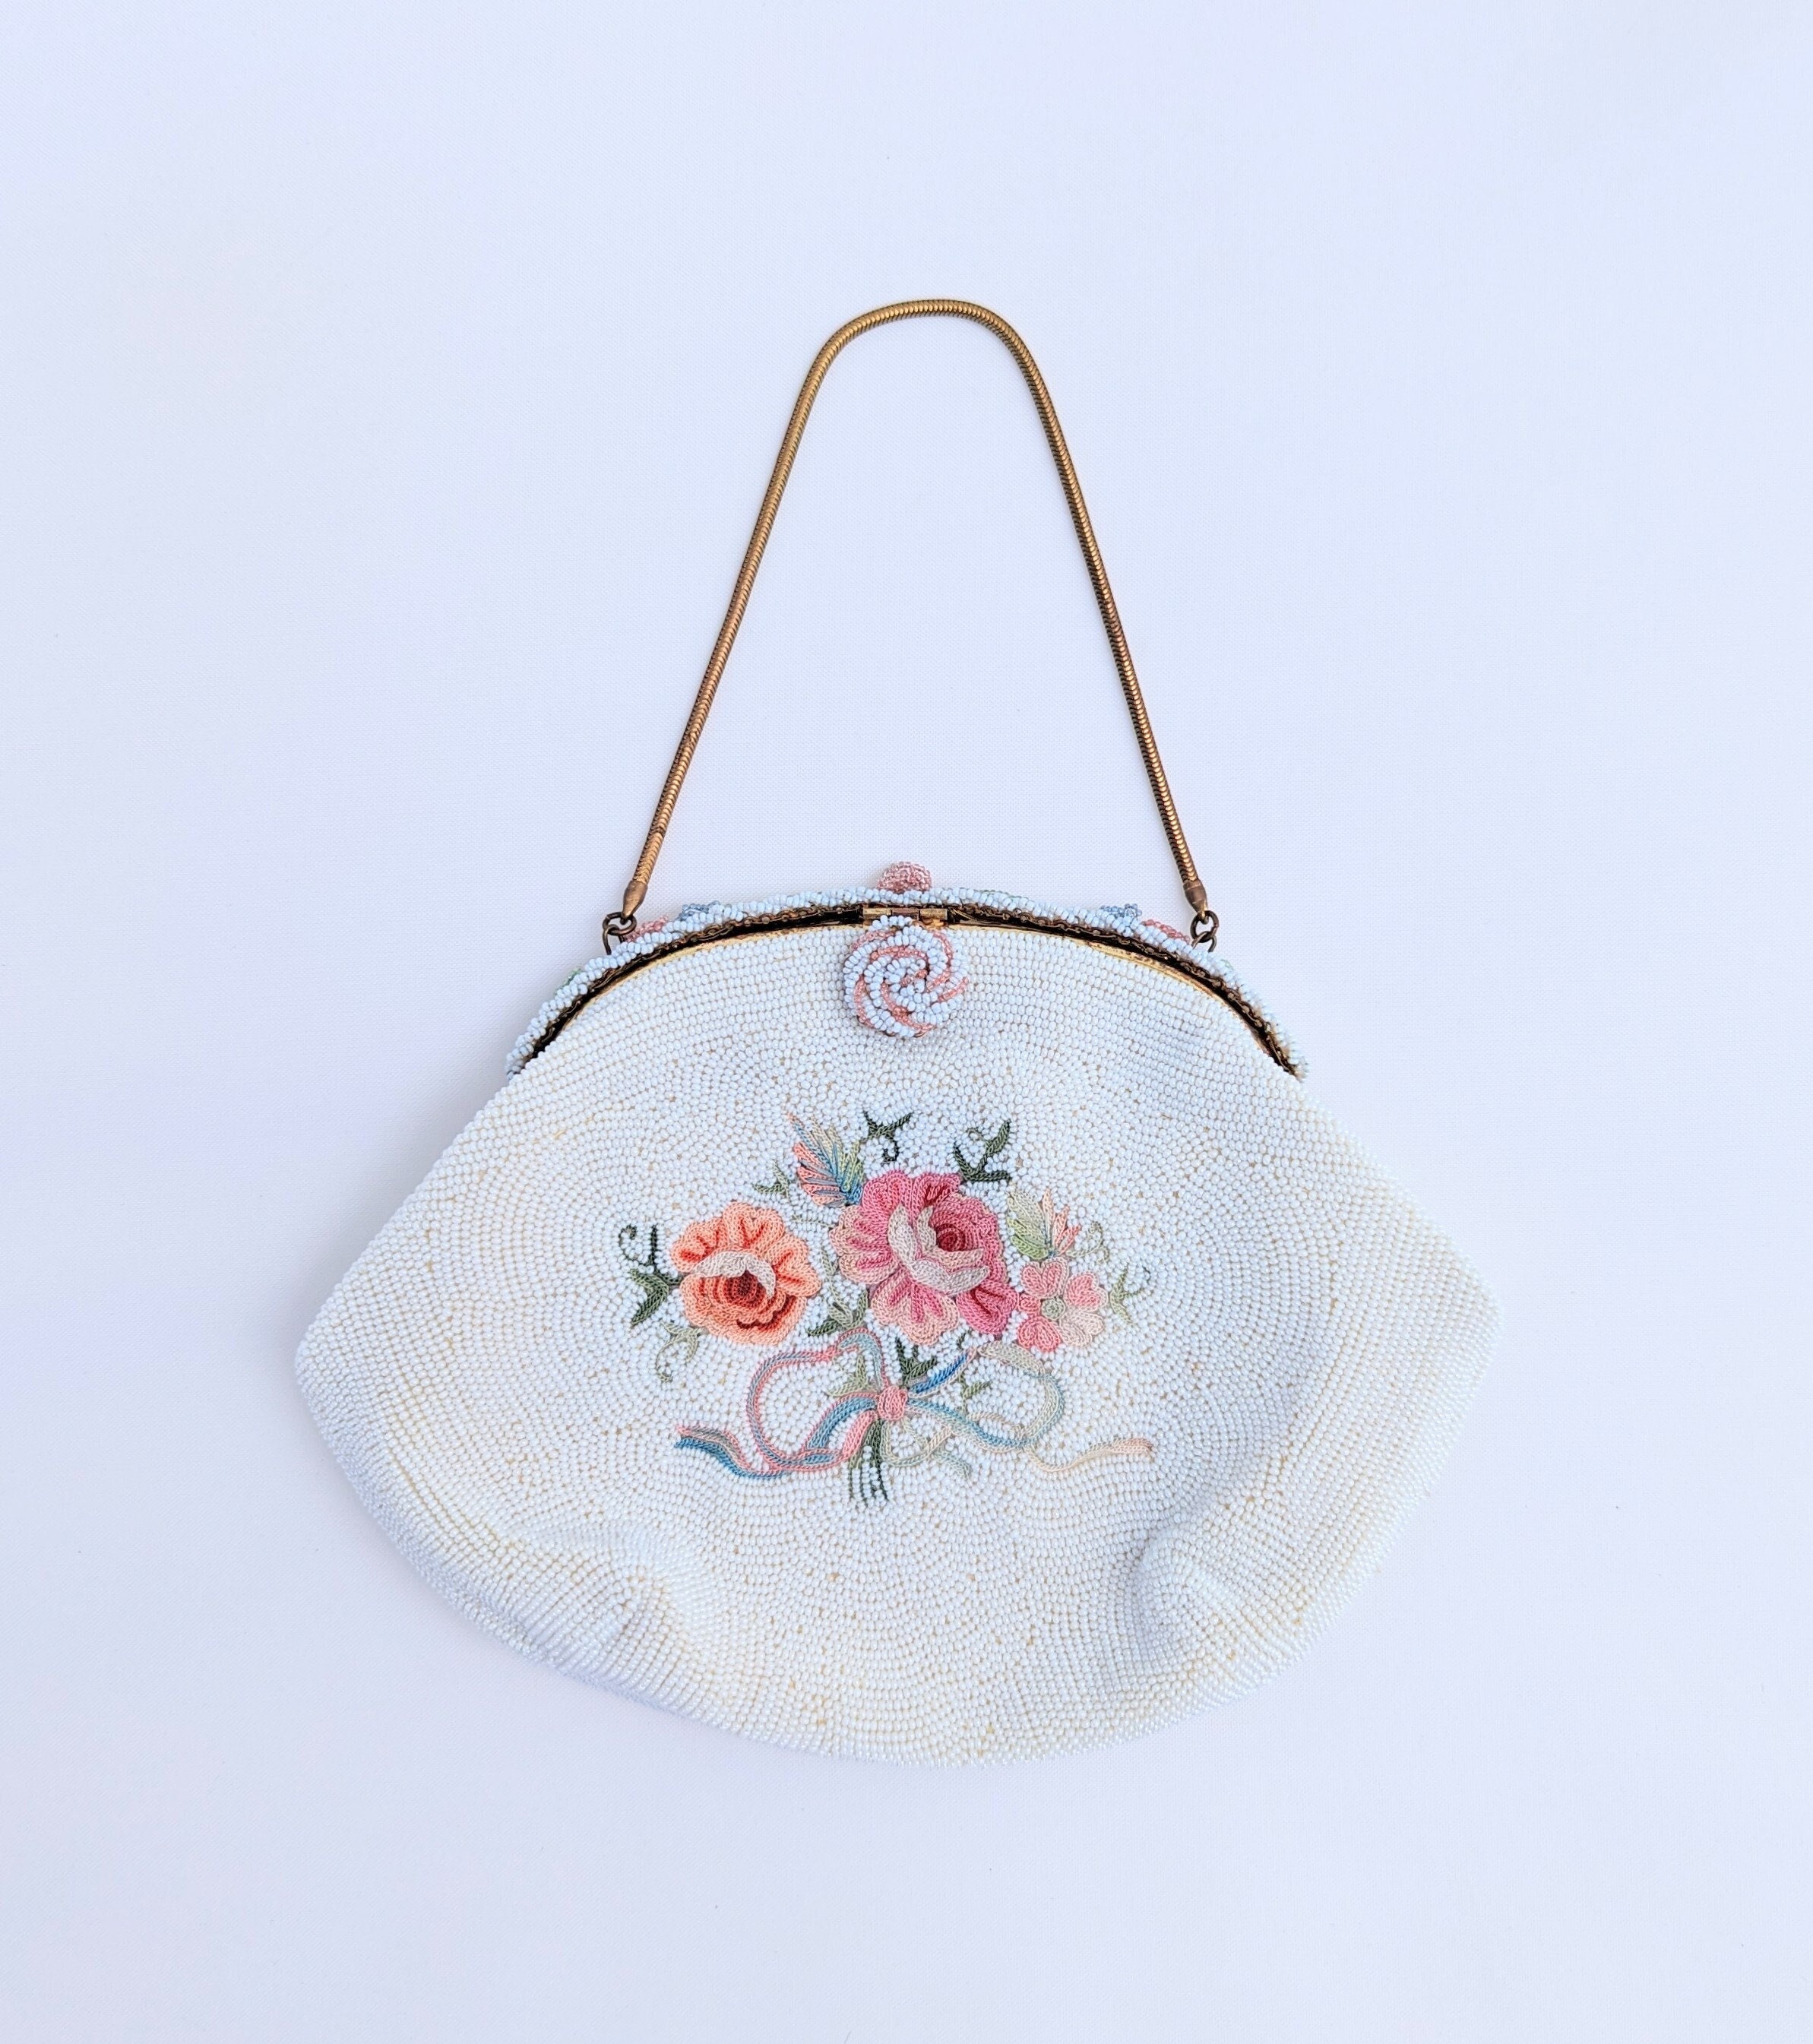 Vintage Beaded Embroidered Tambour Purse Embroidery Hand Bag Made In Italy